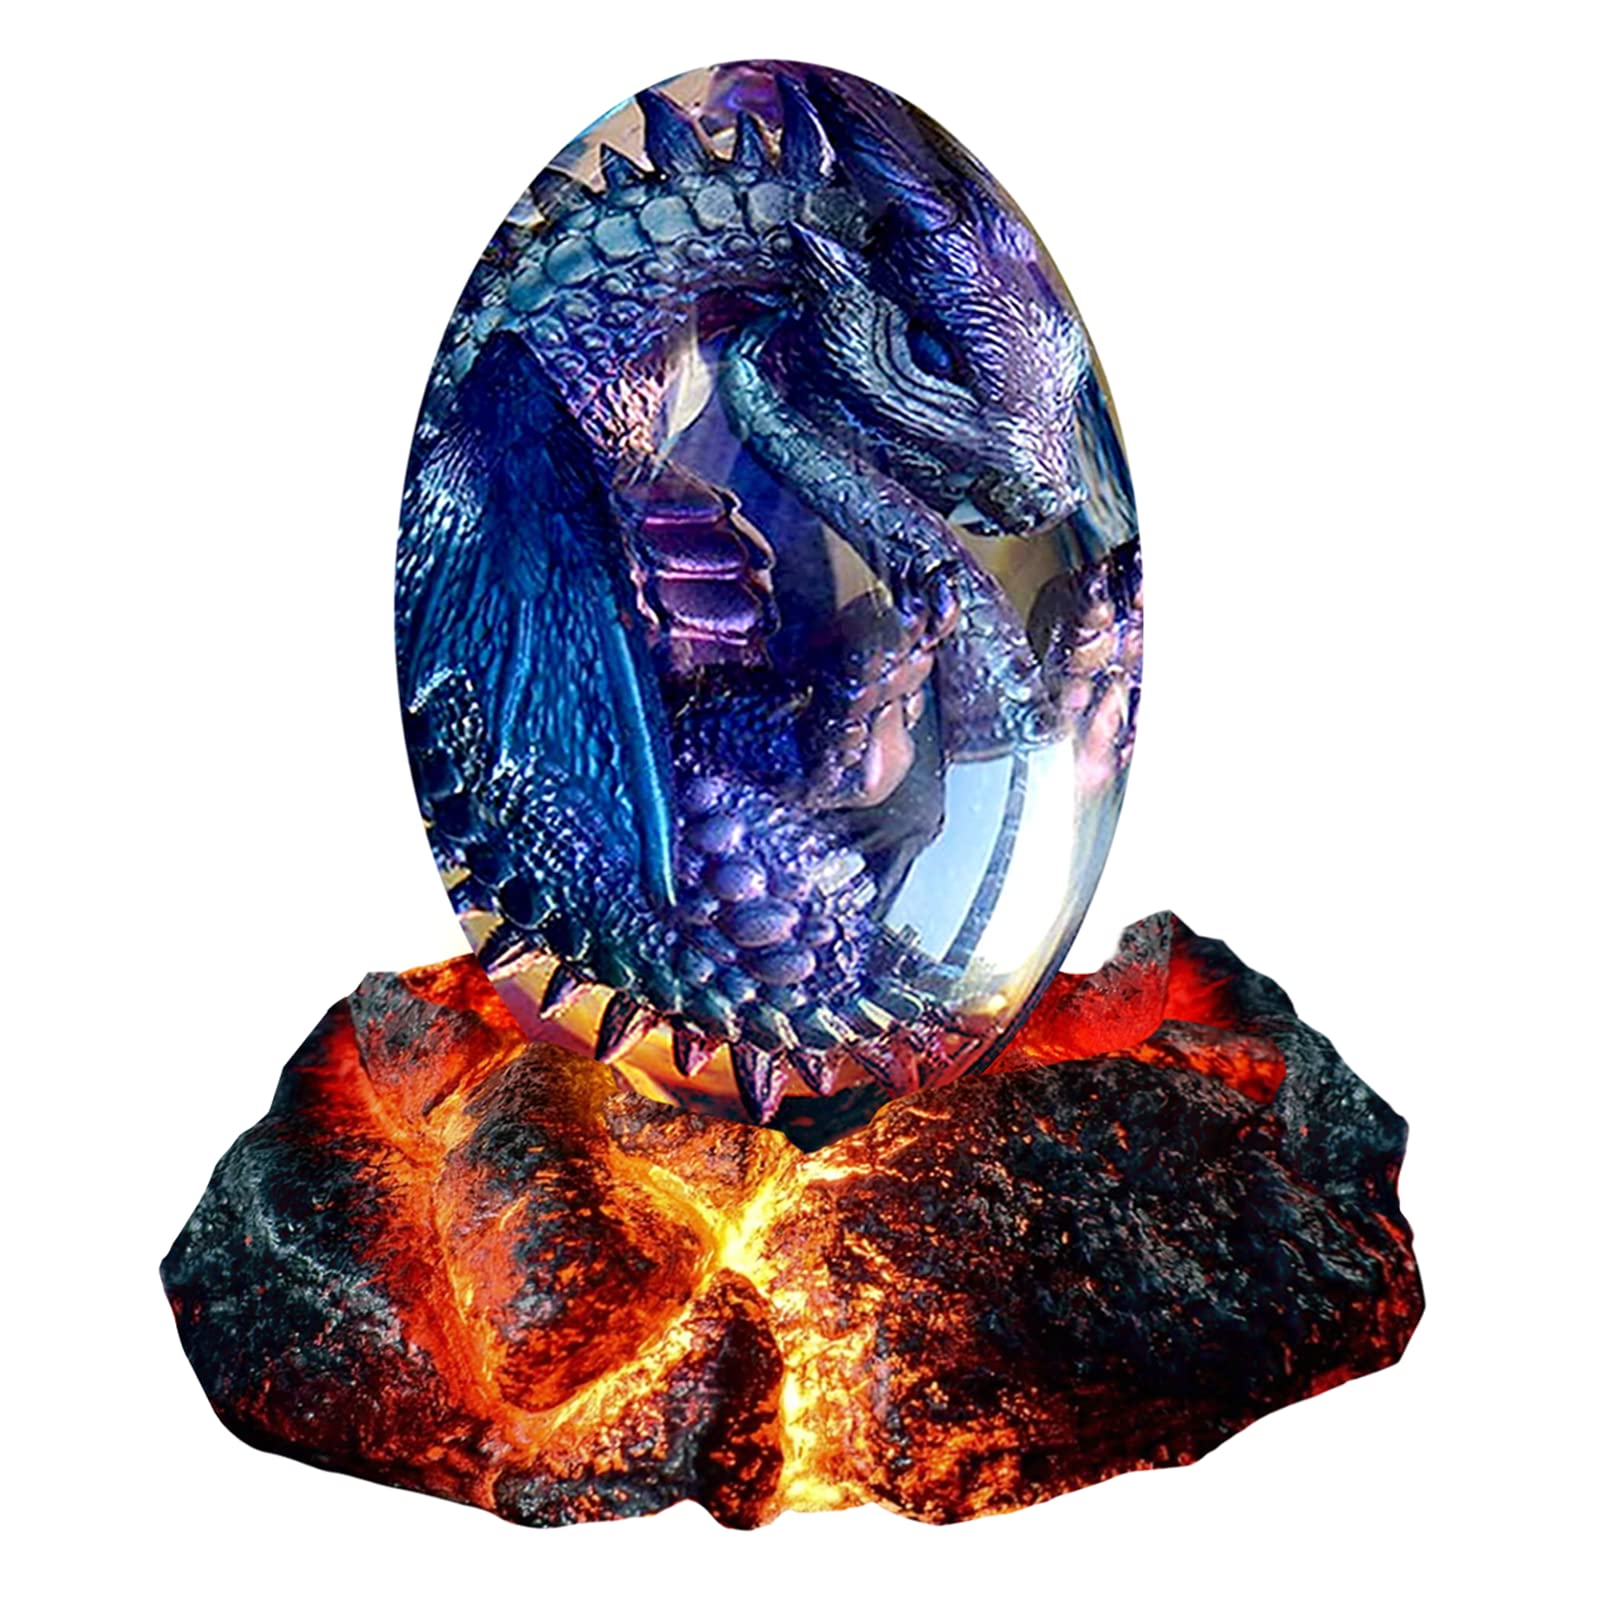 ACOCOFE Dragons Egg, Lava Dragon Egg with Luminous Base, Handmade Sculpture Dragon Eggs Resin Ornaments, Gift for The Holidays, Christmas, Birthdays, Graduation, Back to School (Purple with Base)